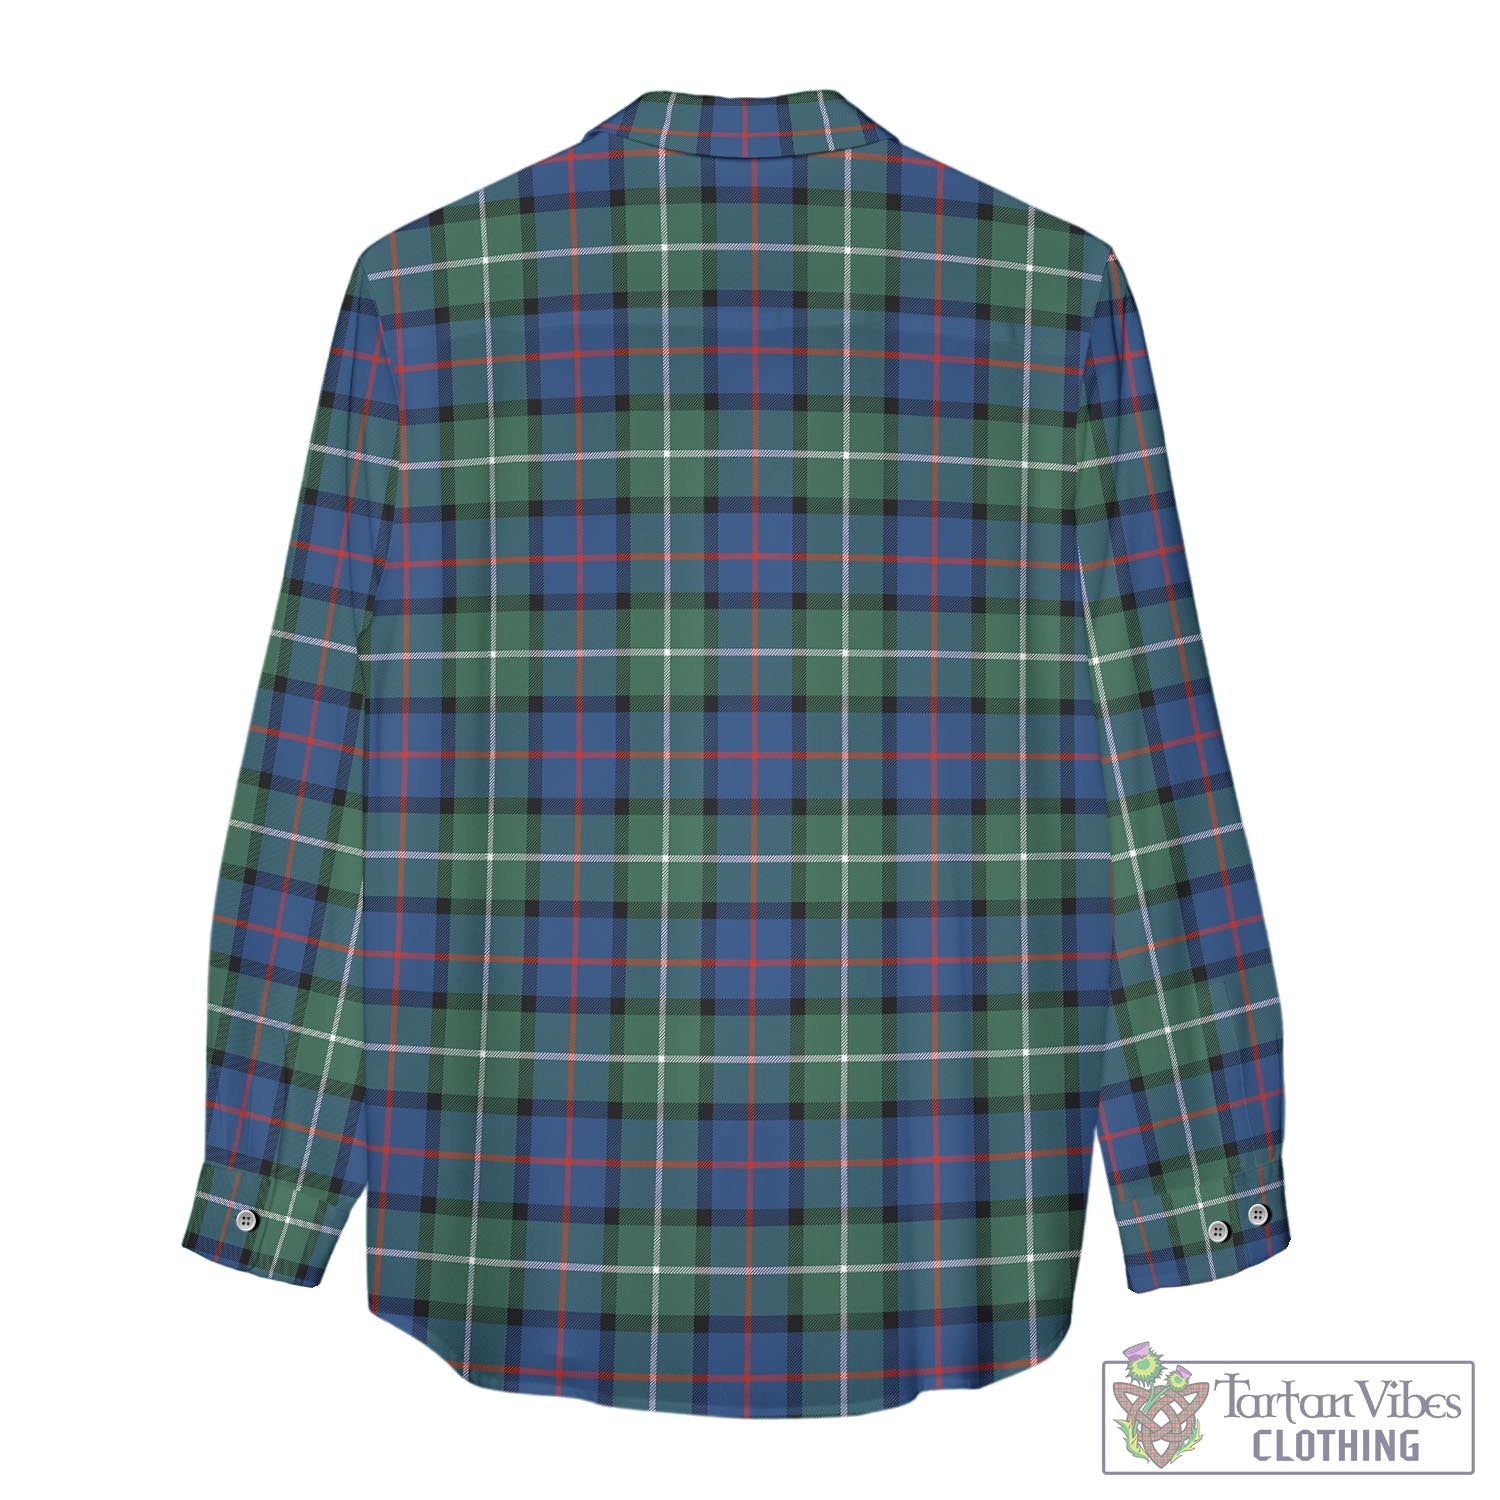 Tartan Vibes Clothing Davidson of Tulloch Tartan Womens Casual Shirt with Family Crest